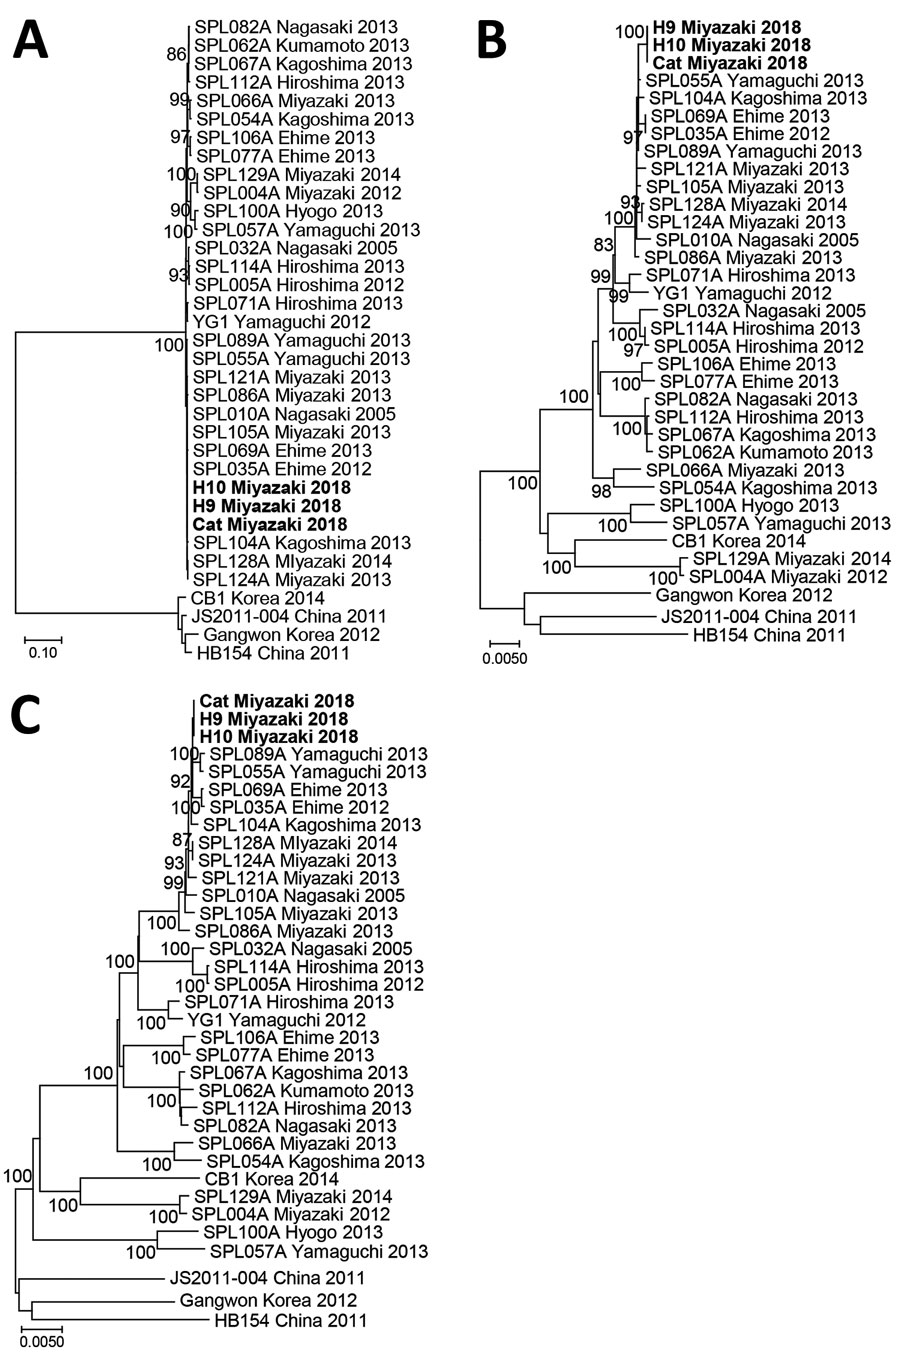 Phylogenetic analyses of severe fever with thrombocytopenia syndrome virus strains obtained from a cat and veterinary personnel in animal hospital, Japan, 2018. A) Small; B) medium; and C) large viral genomic RNA segments. Bold indicates H9/Miyazaki/2018 (from patient 1), H10/Miyazaki/2018 (from patient 2), and cat/Miyazaki/2018 (from cat). Scale bars indicate nucleotide substitutions per site.